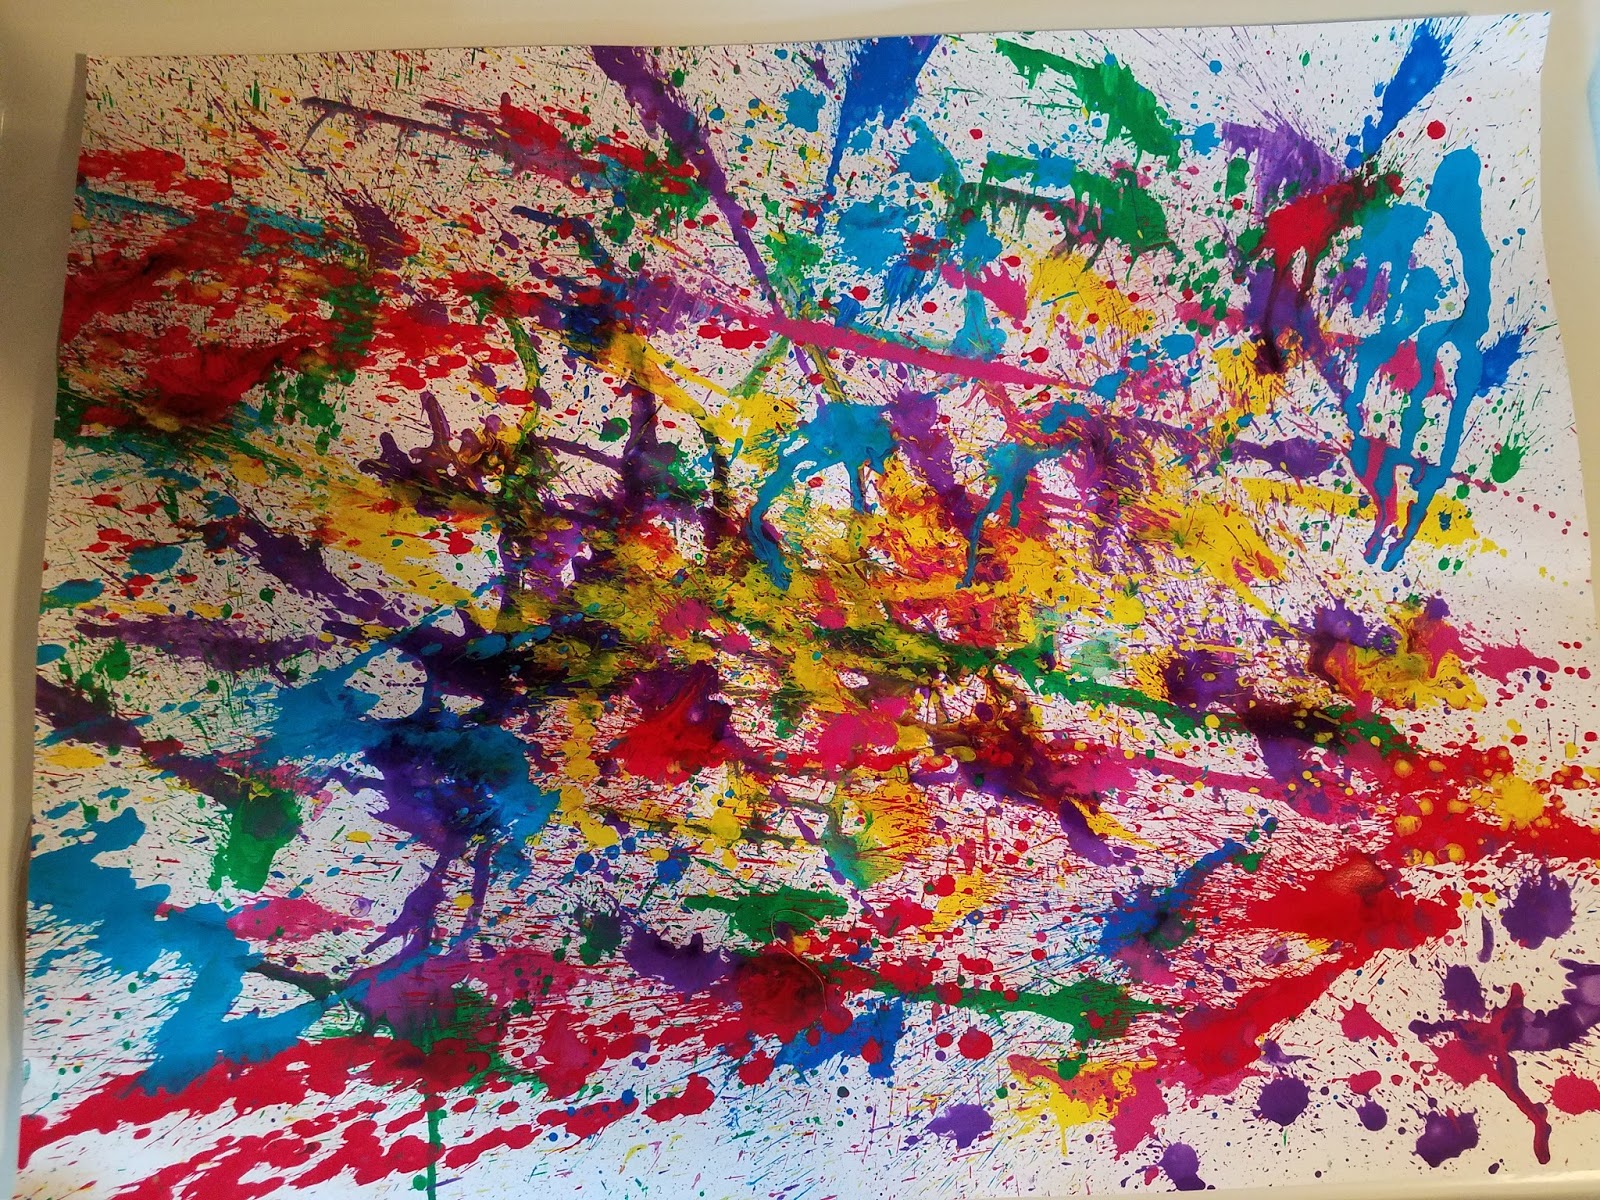 Piece of paper splattered with paint.